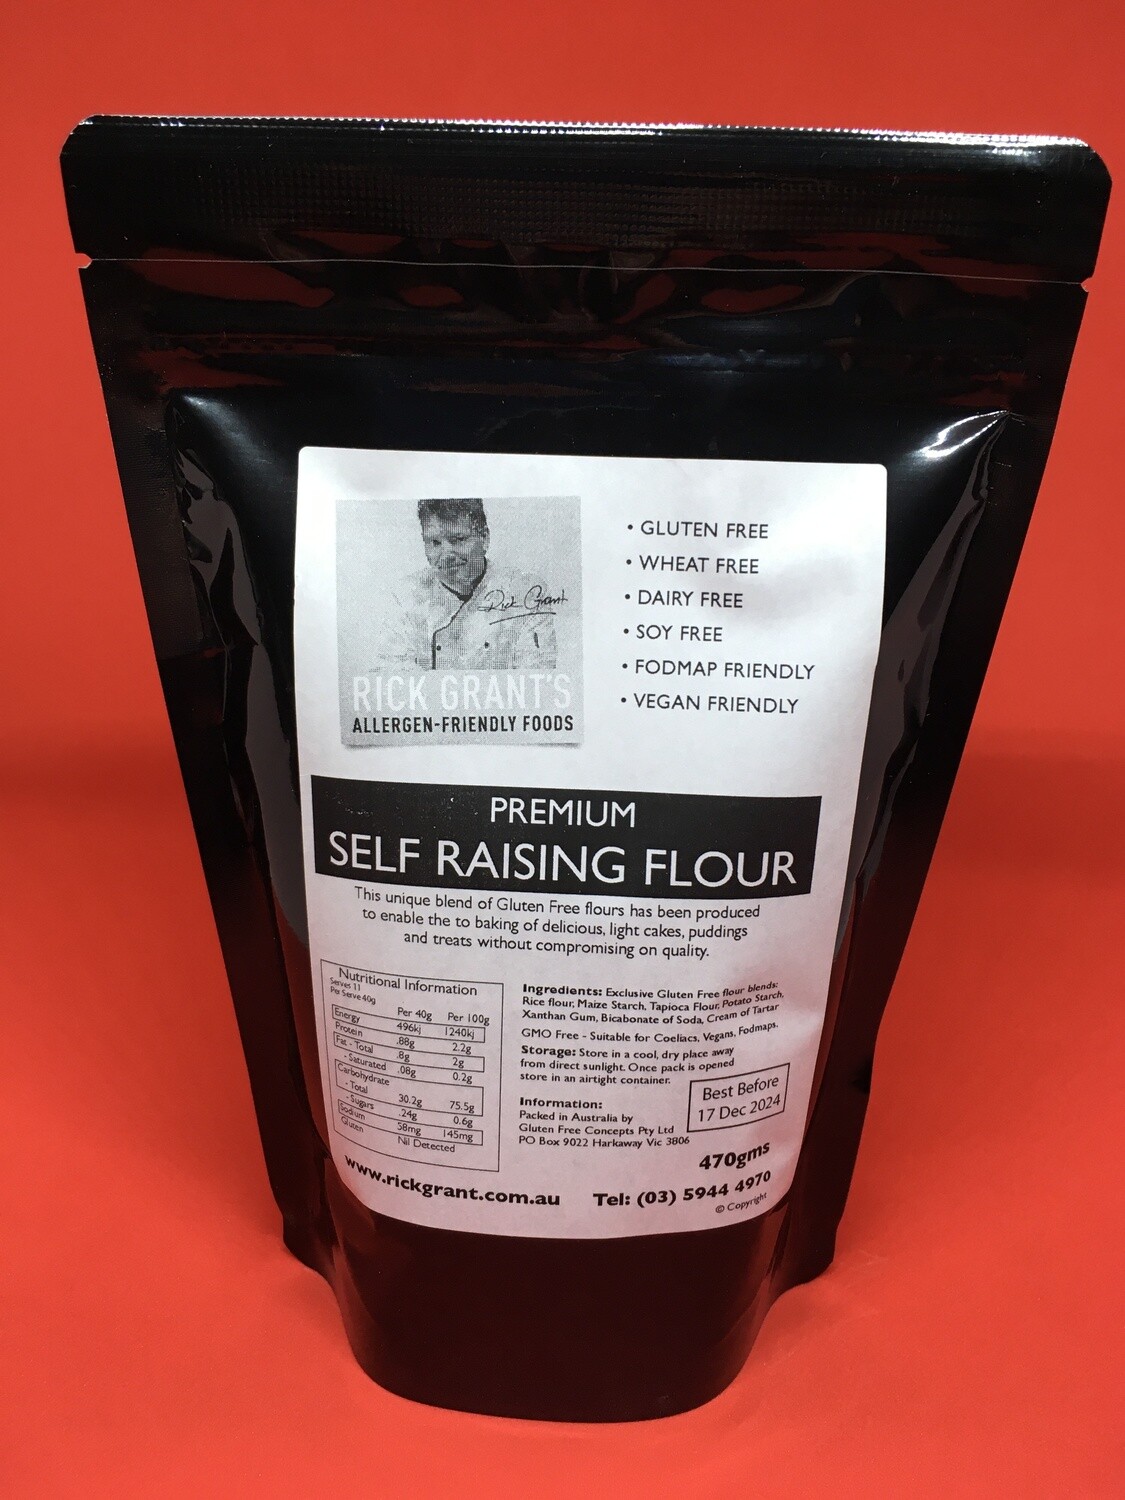 NEW TO THE STORE!
Premium Gluten Free Self Raising Flour can be used for cakes, slices &amp; muffins!